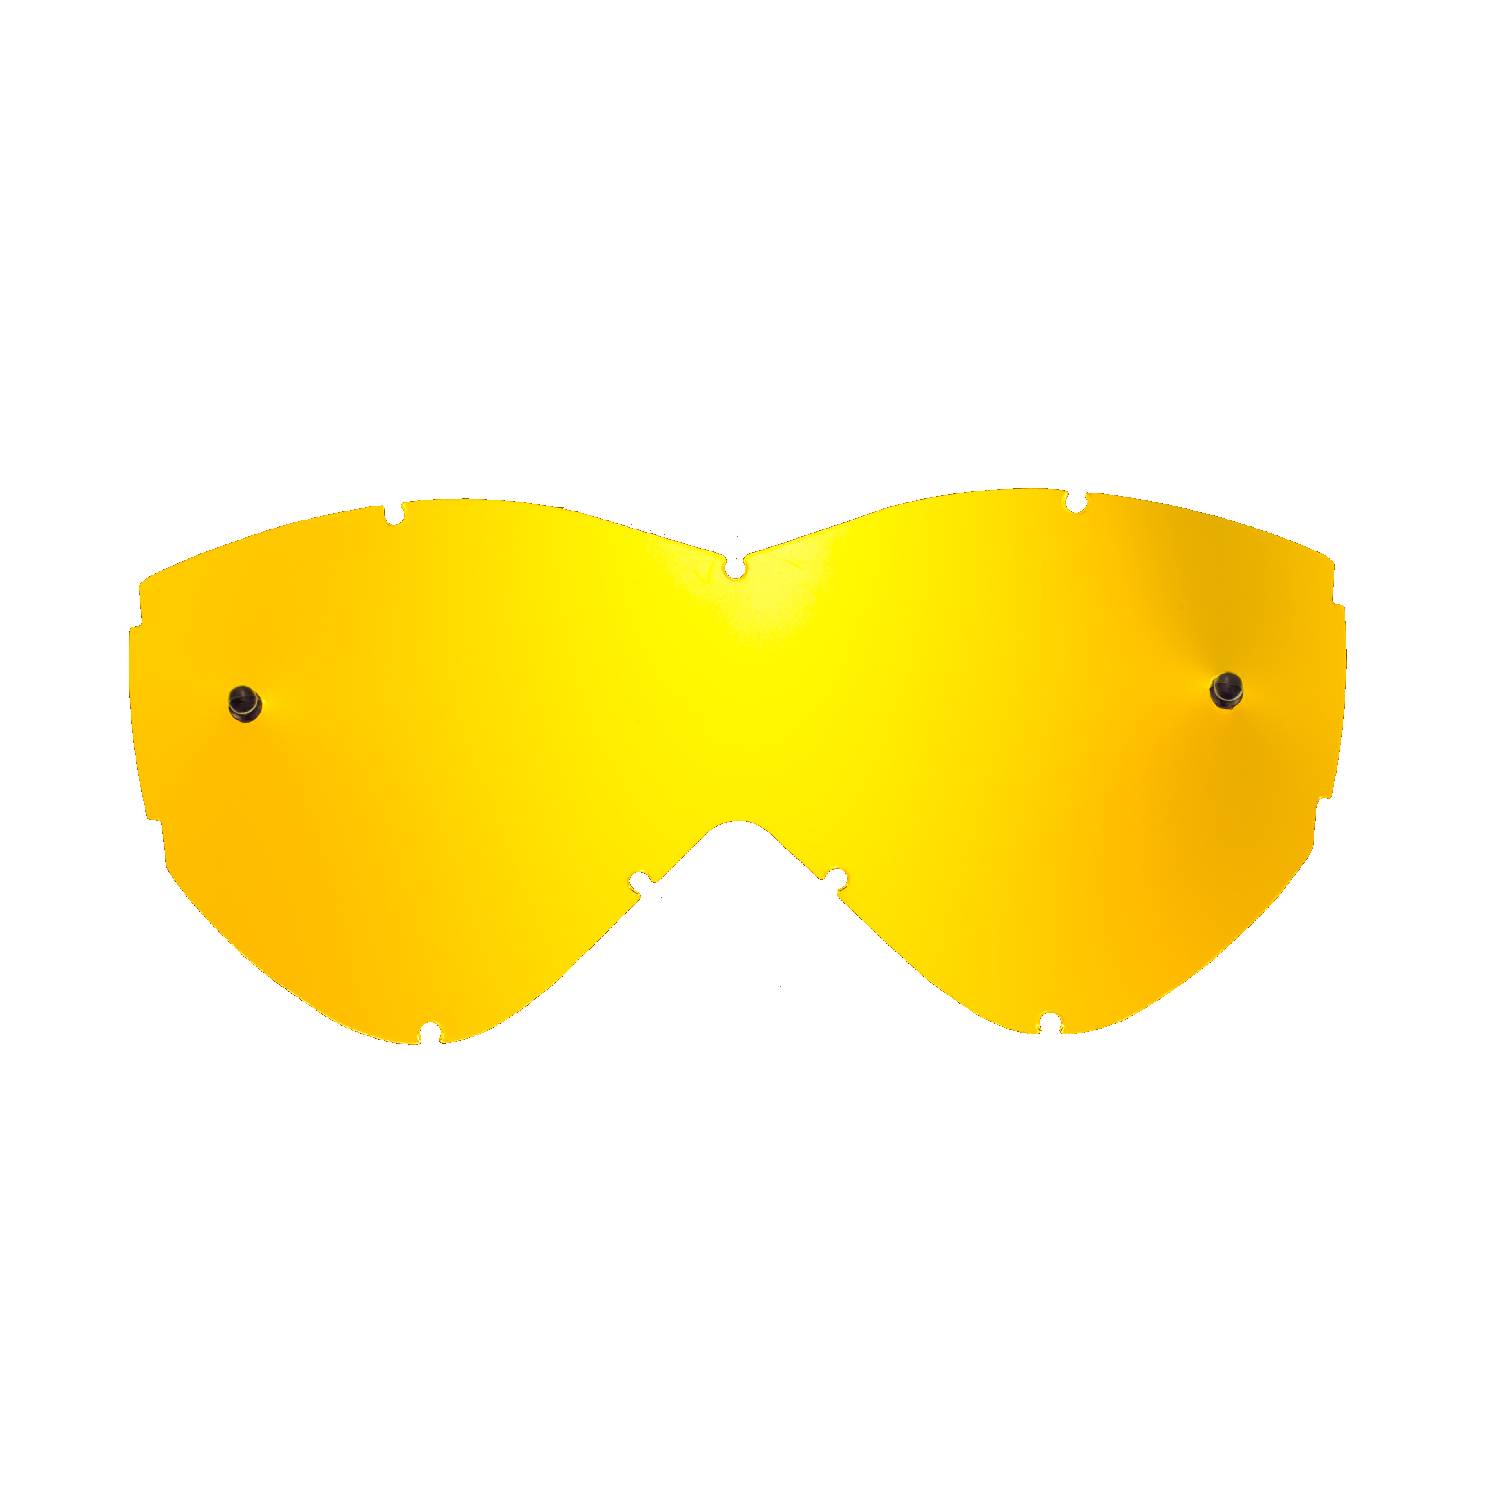 gold-toned mirrored replacement lenses for goggles compatible for Smith Warp goggle